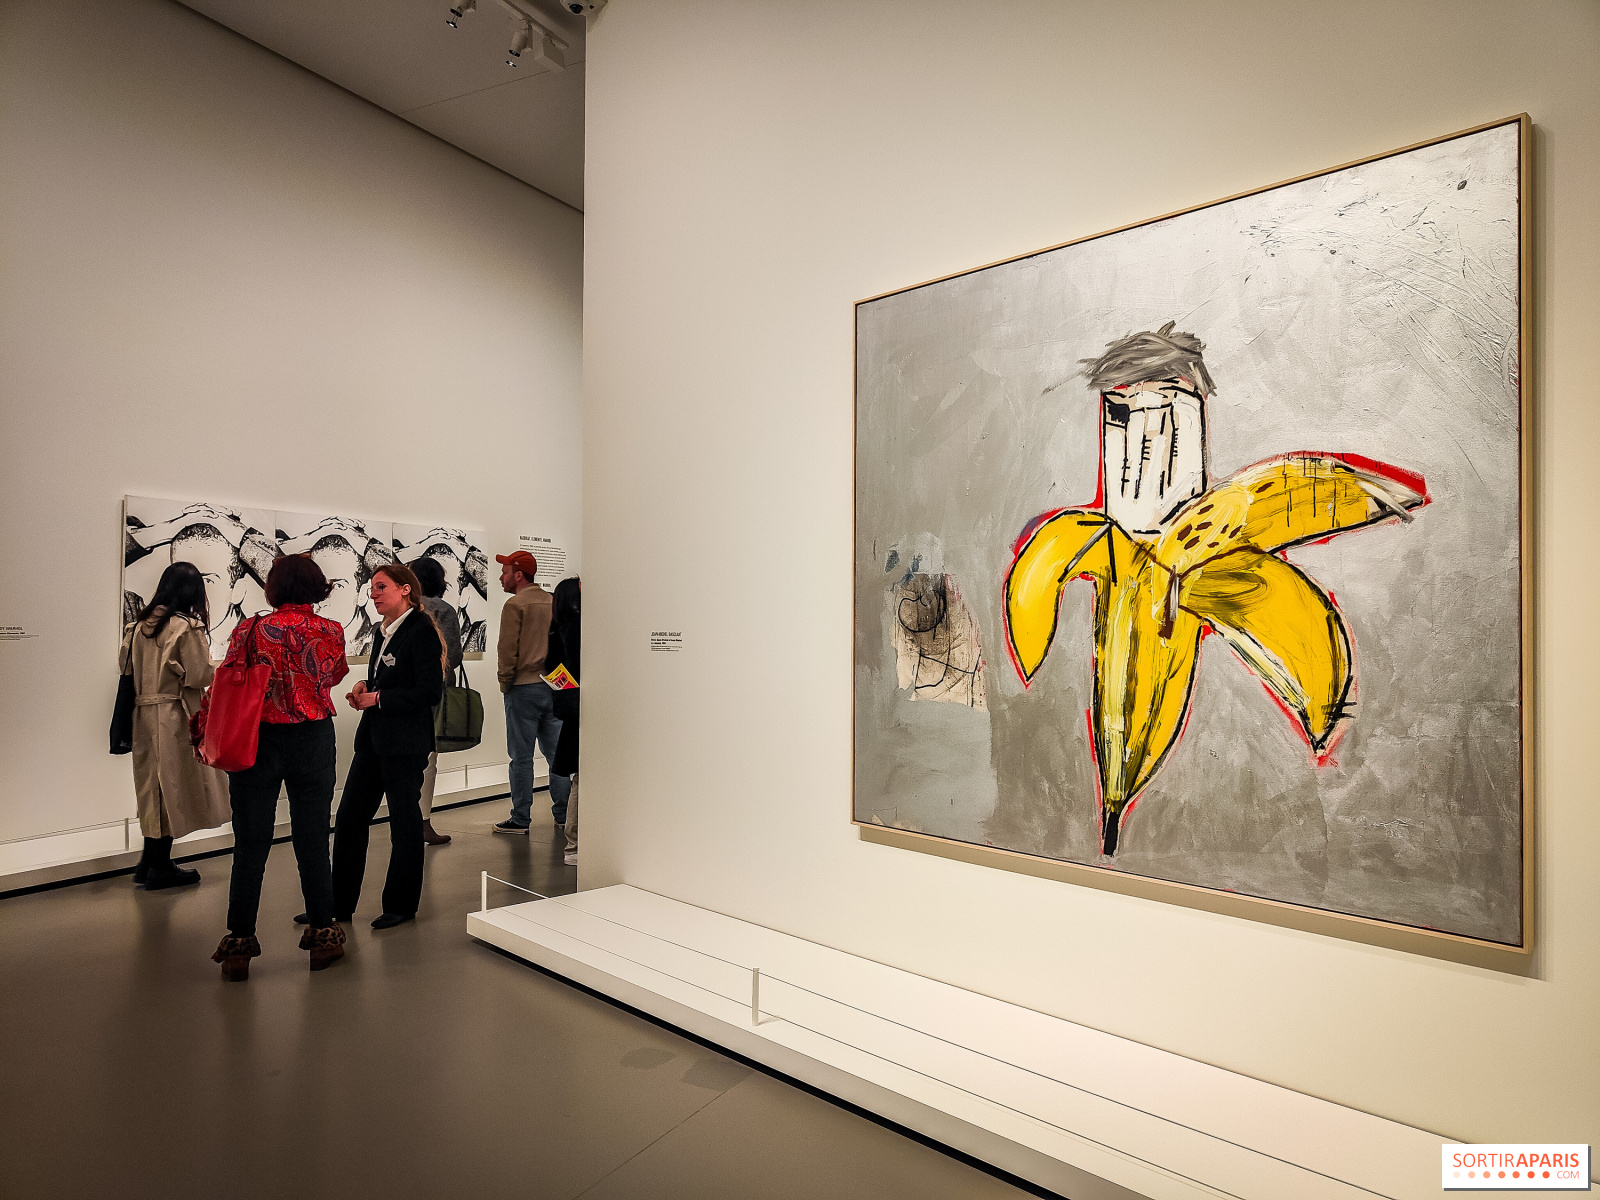 Basquiat x Warhol at Fondation Louis Vuitton — sparks fly in